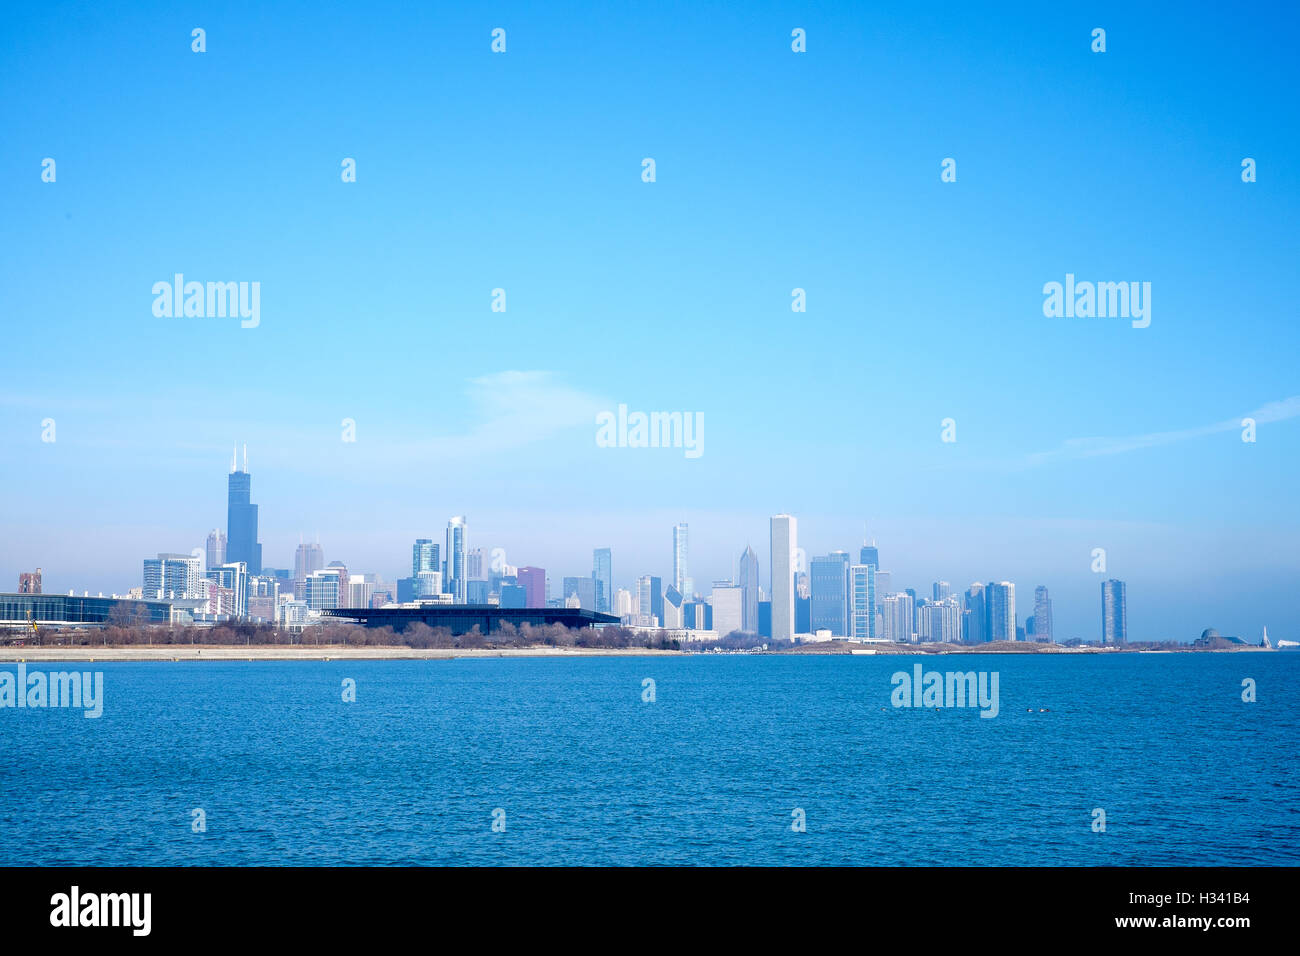 Chicago skyline as seen from the South Side at 31st St beach Stock Photo